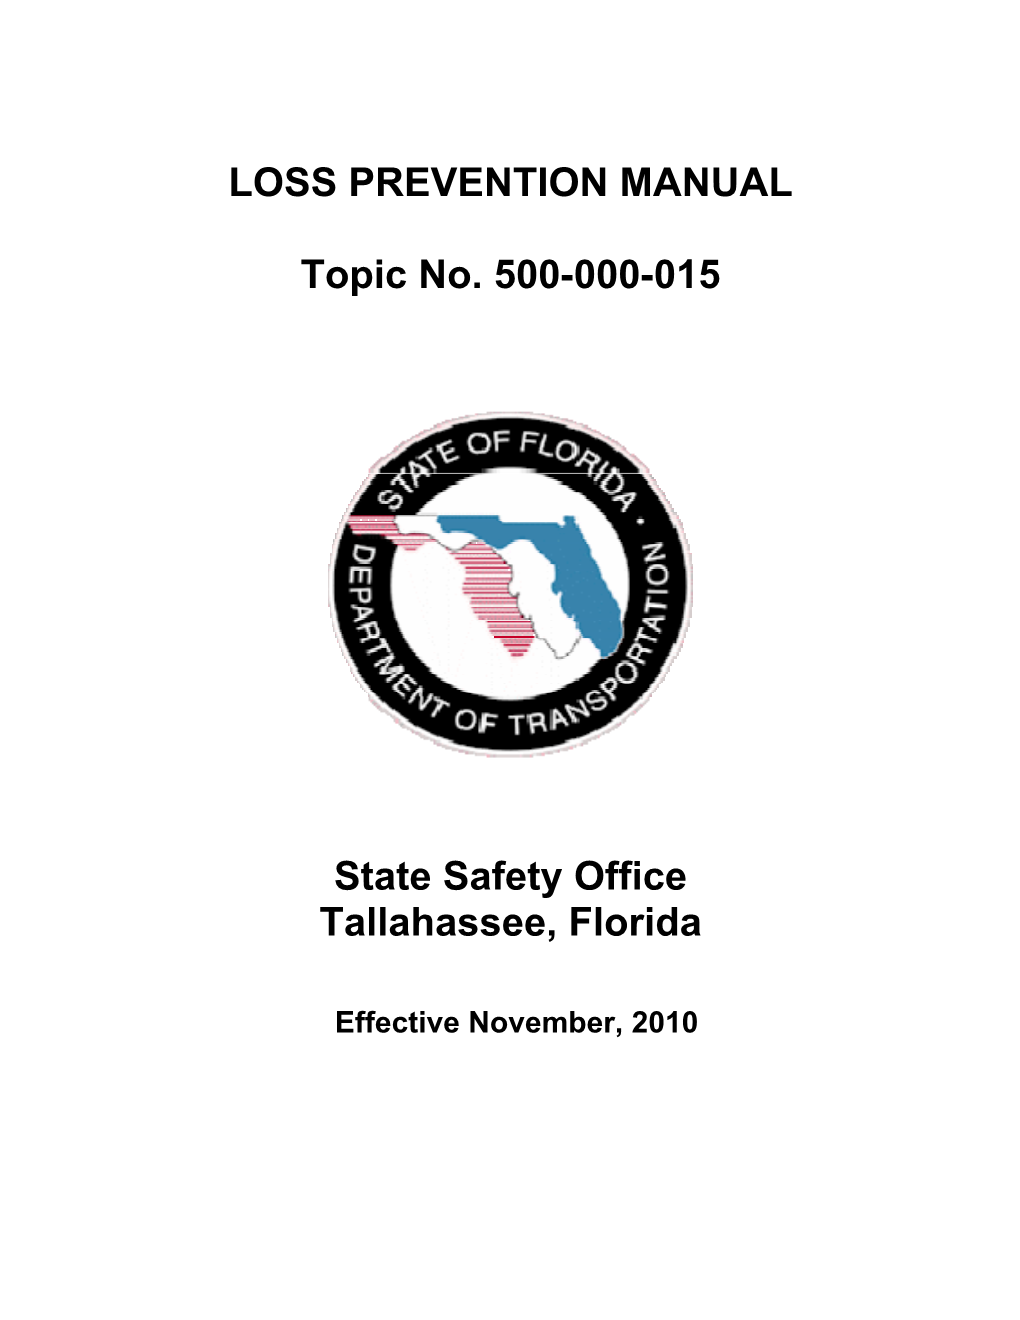 LOSS PREVENTION MANUAL Topic No. 500-000-015 State Safety Office